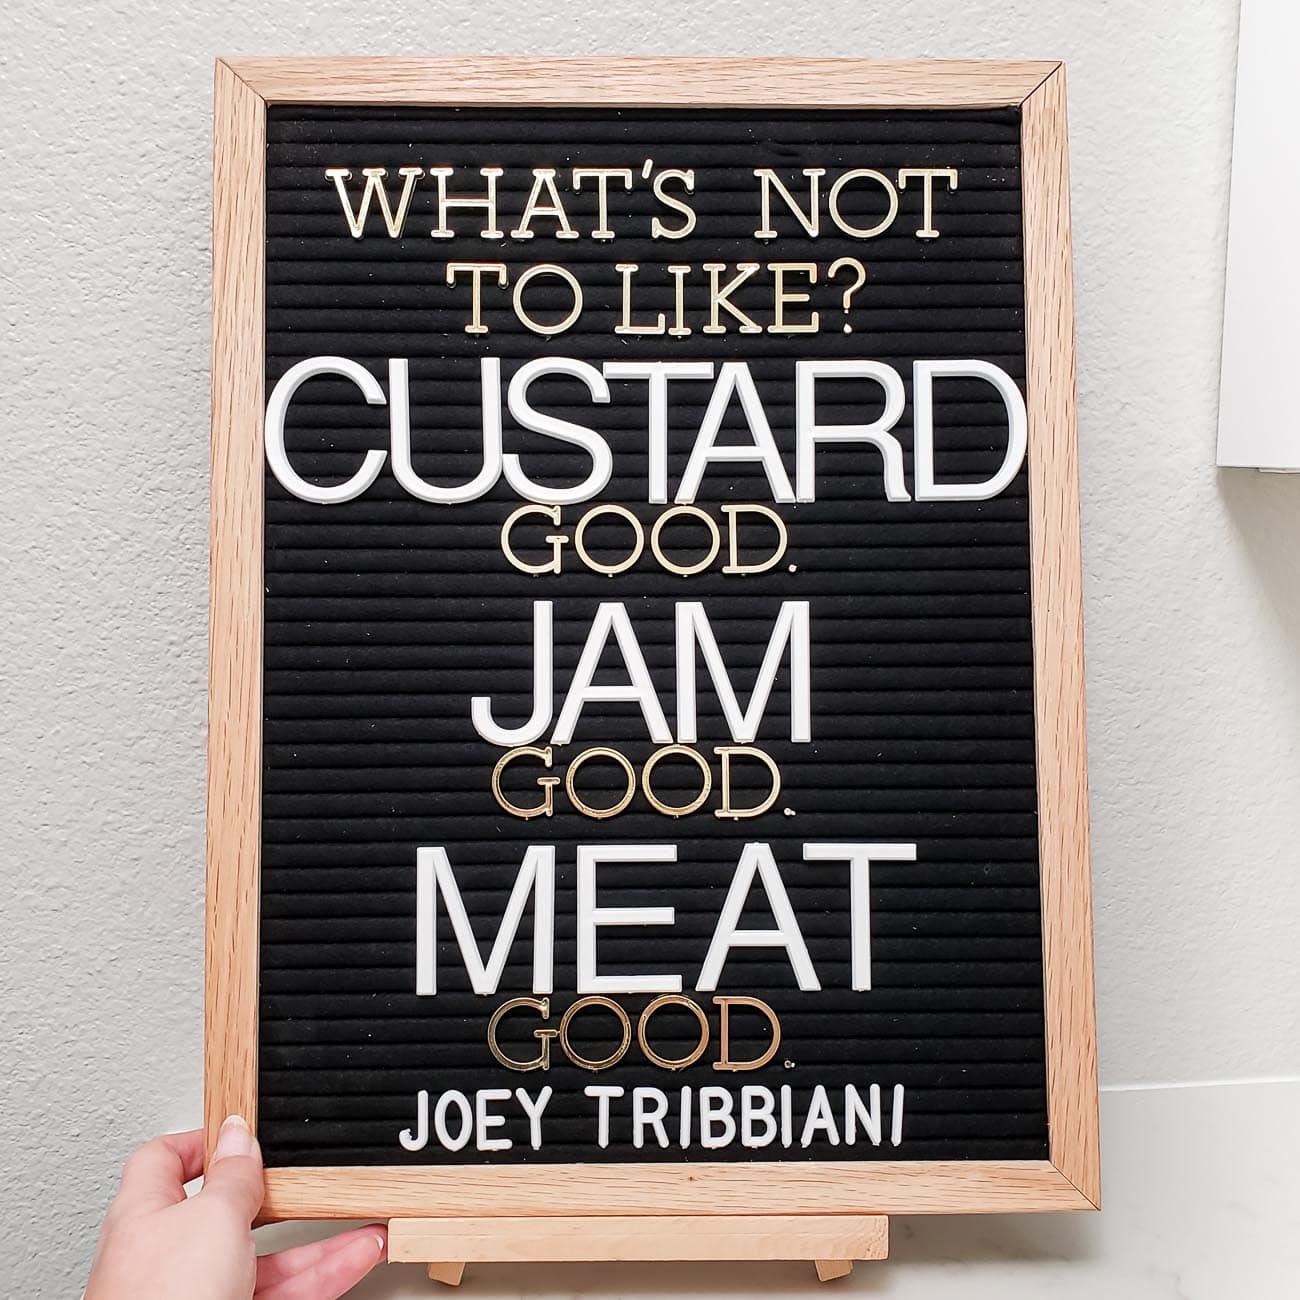 Quote from Friends TV Show - What's Not to Like? Custard, Good. Jam Good, Meat Good. On black letterboard. 